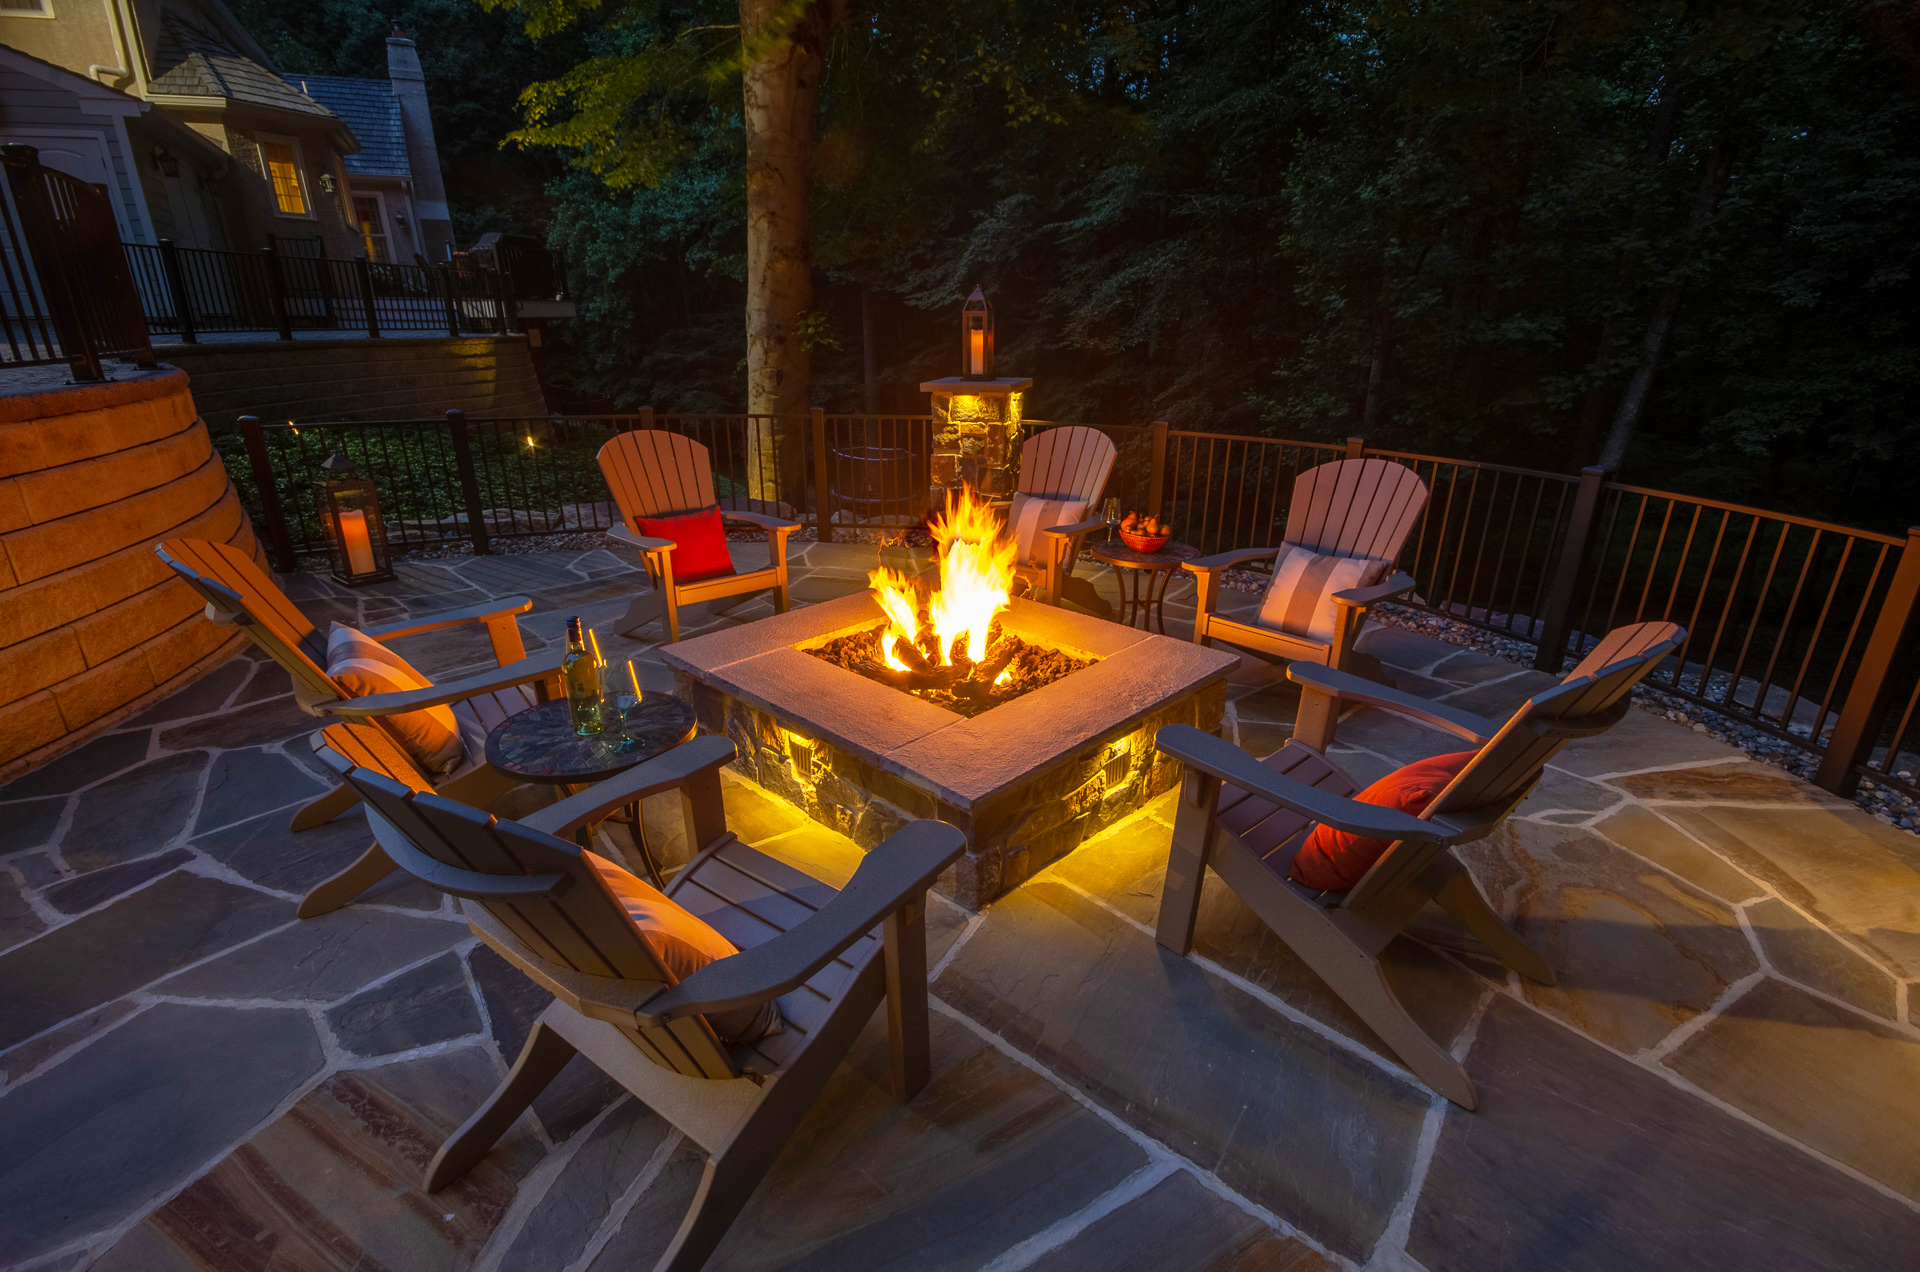 Outdoor Fireplaces Fire Pits Delaware, Propane Fire Pits Wilmington Nc